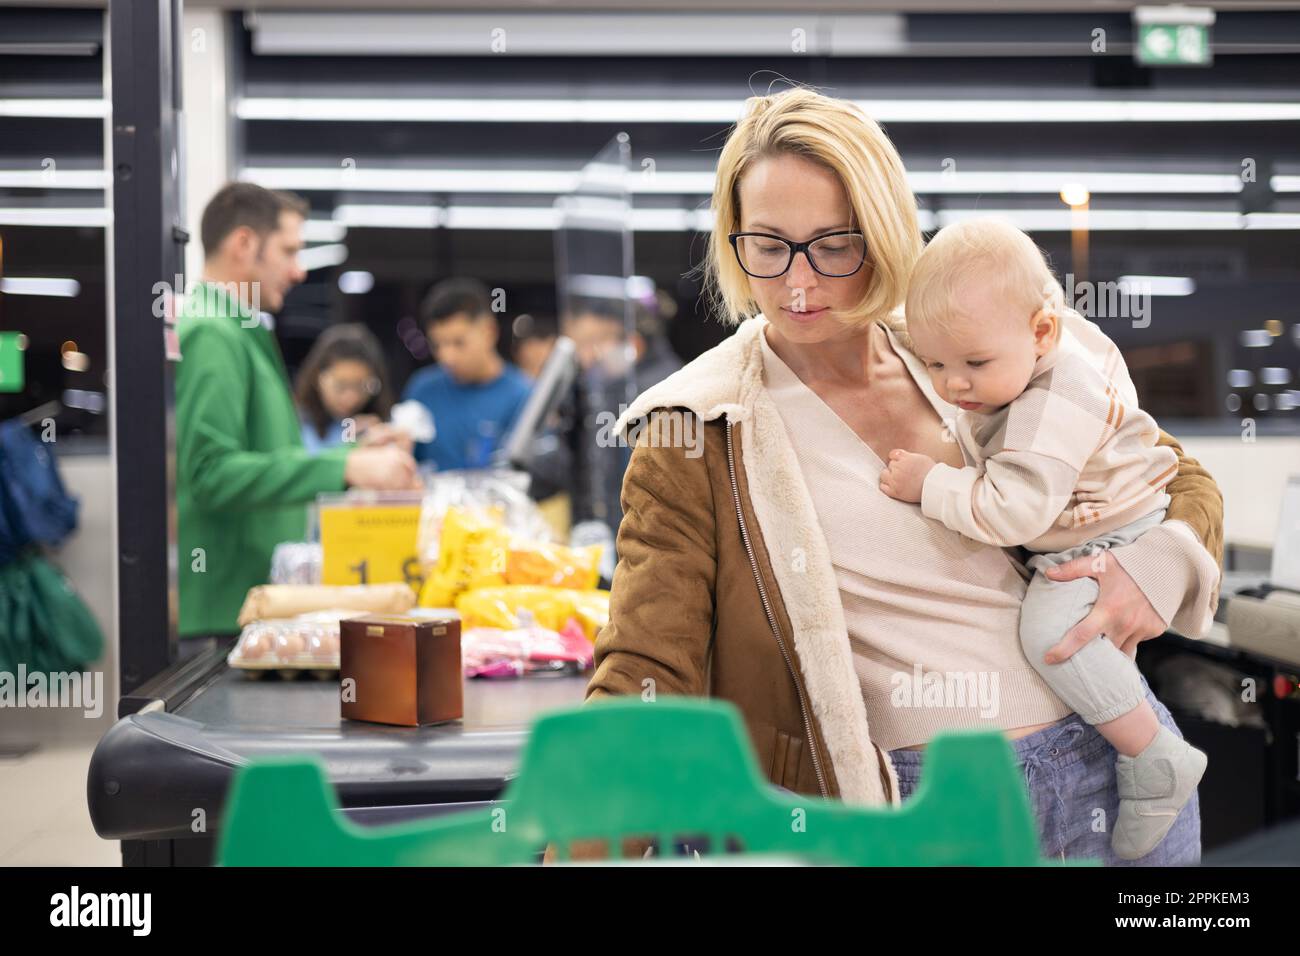 Mother shopping with her infant baby boy, holding the child while stacking products at the cash register in supermarket grocery store. Stock Photo